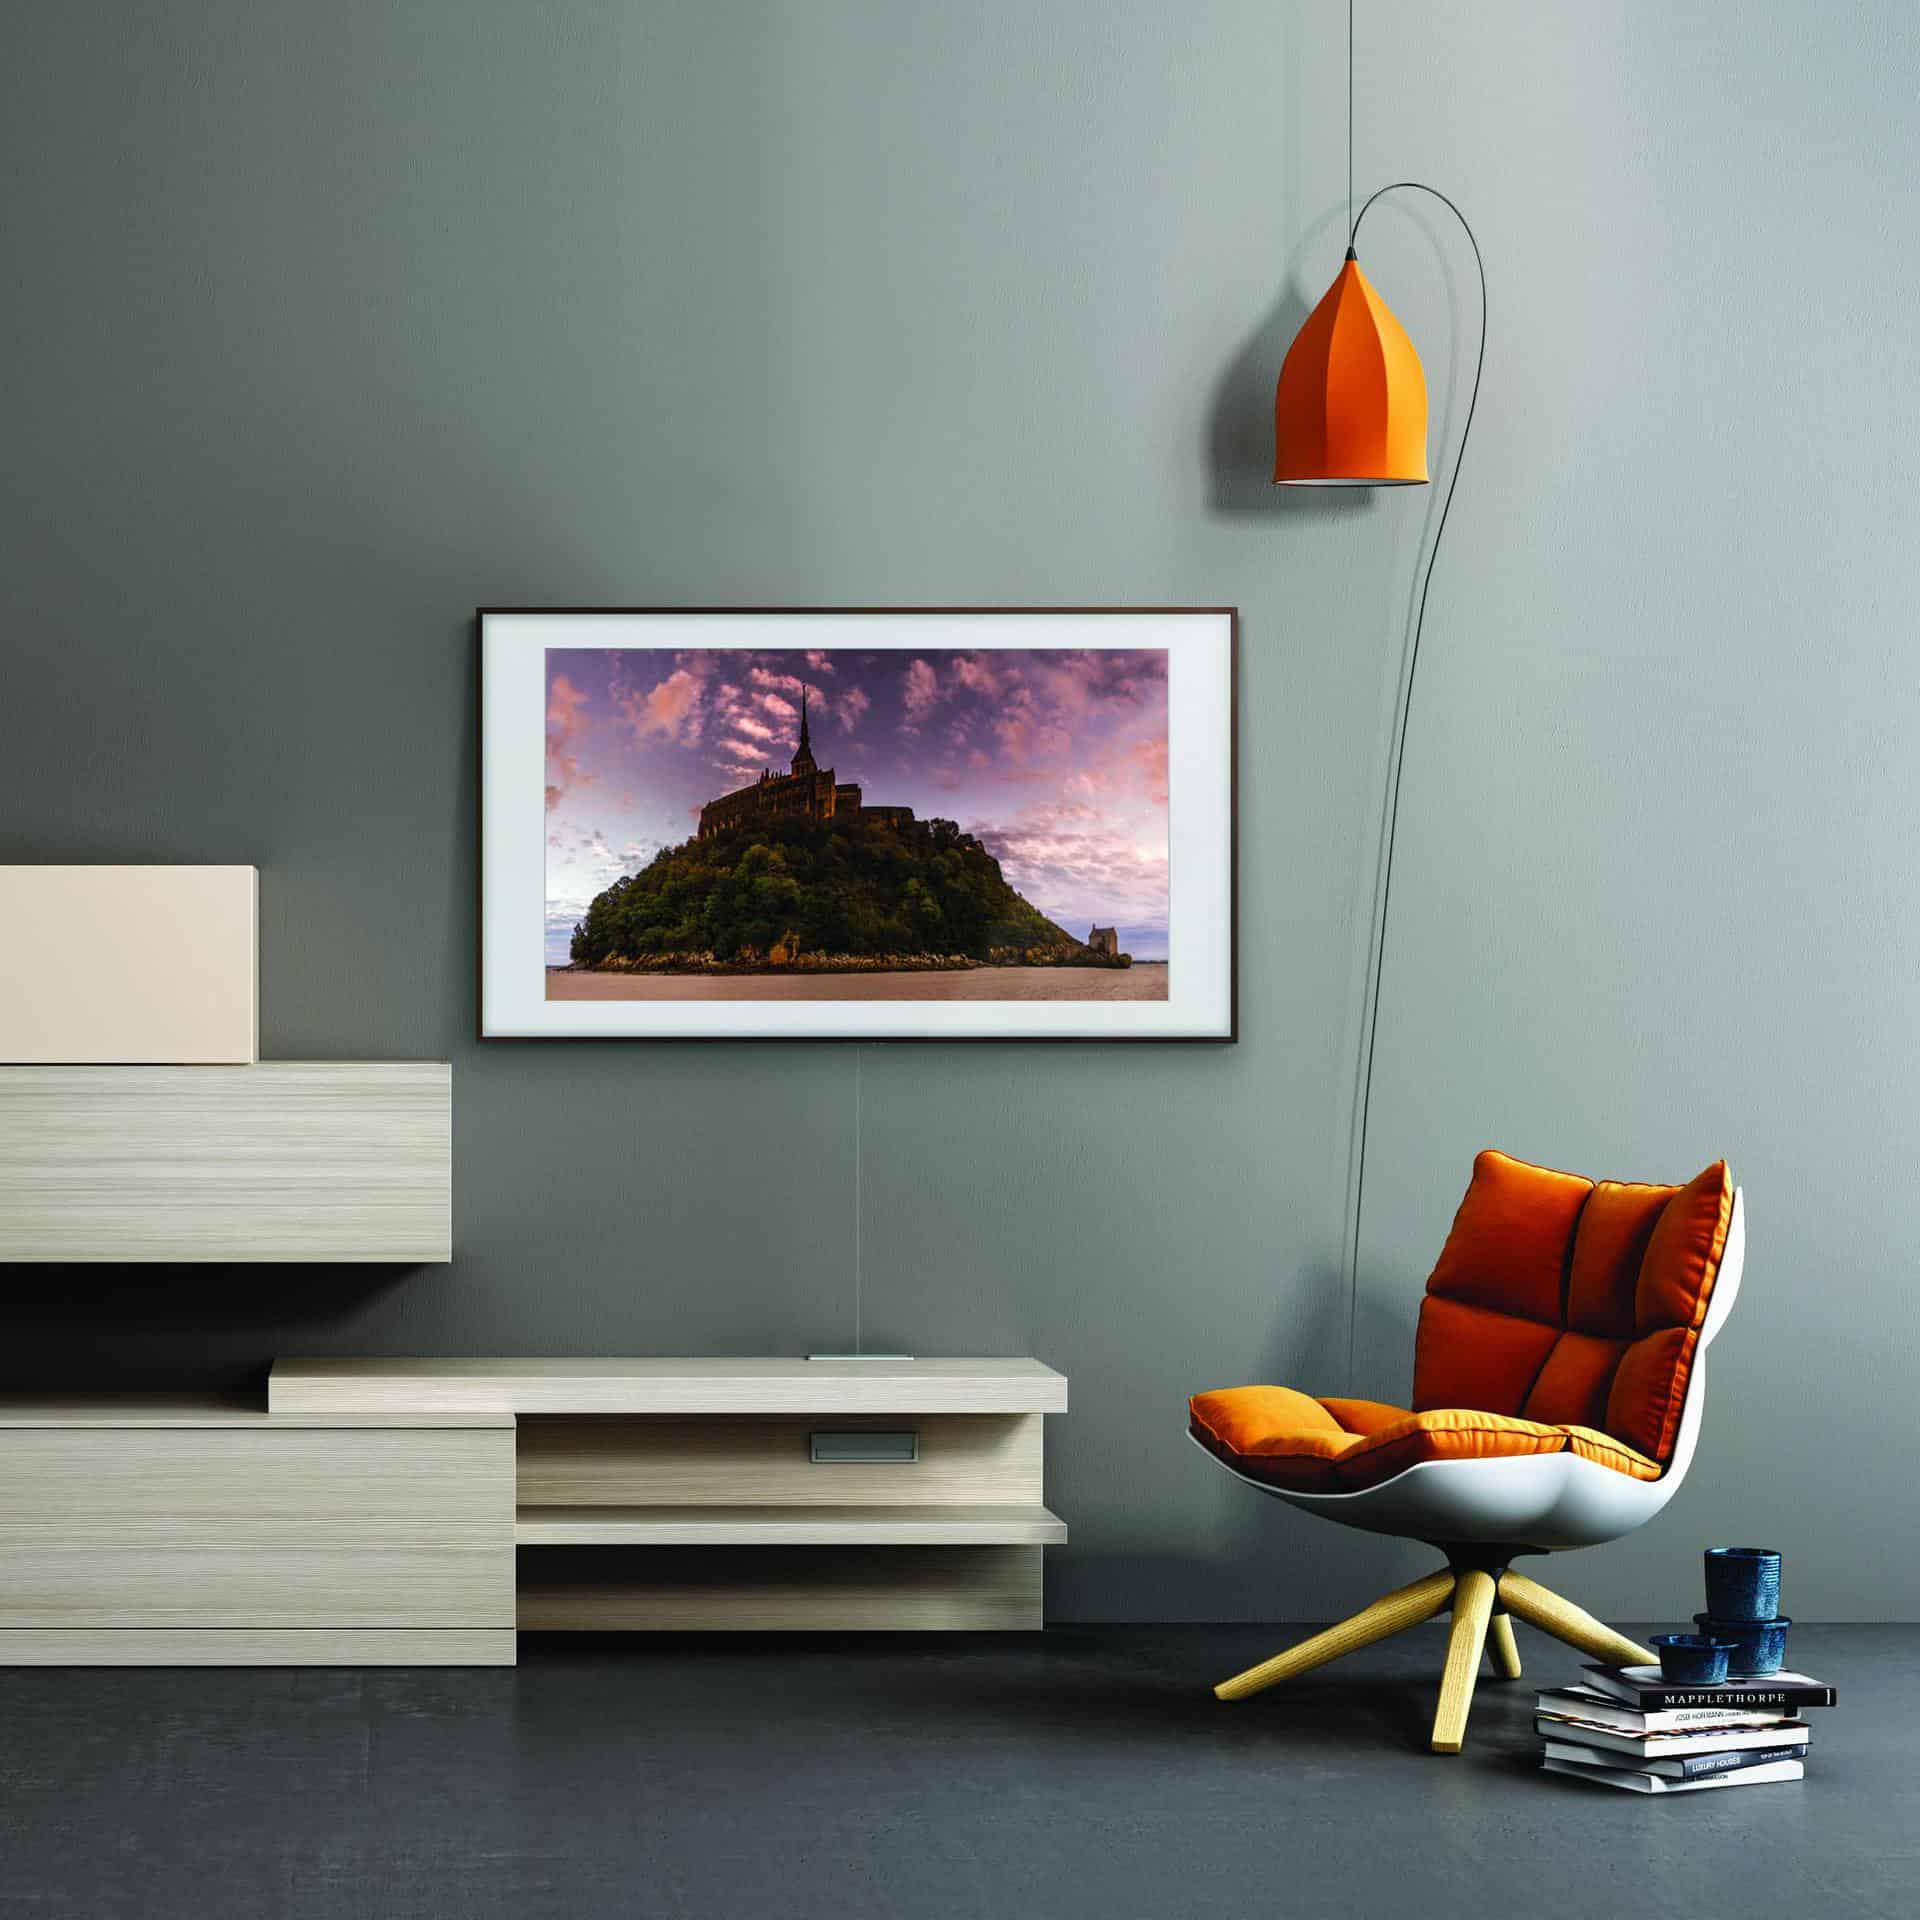 The Samsung Frame TV - a device the company says has been dubbed the world's most aesthetic TV - is now in the Kenyan market. The 65-inch version of the TV will be selling for KES. 239,995 with two year warranty.